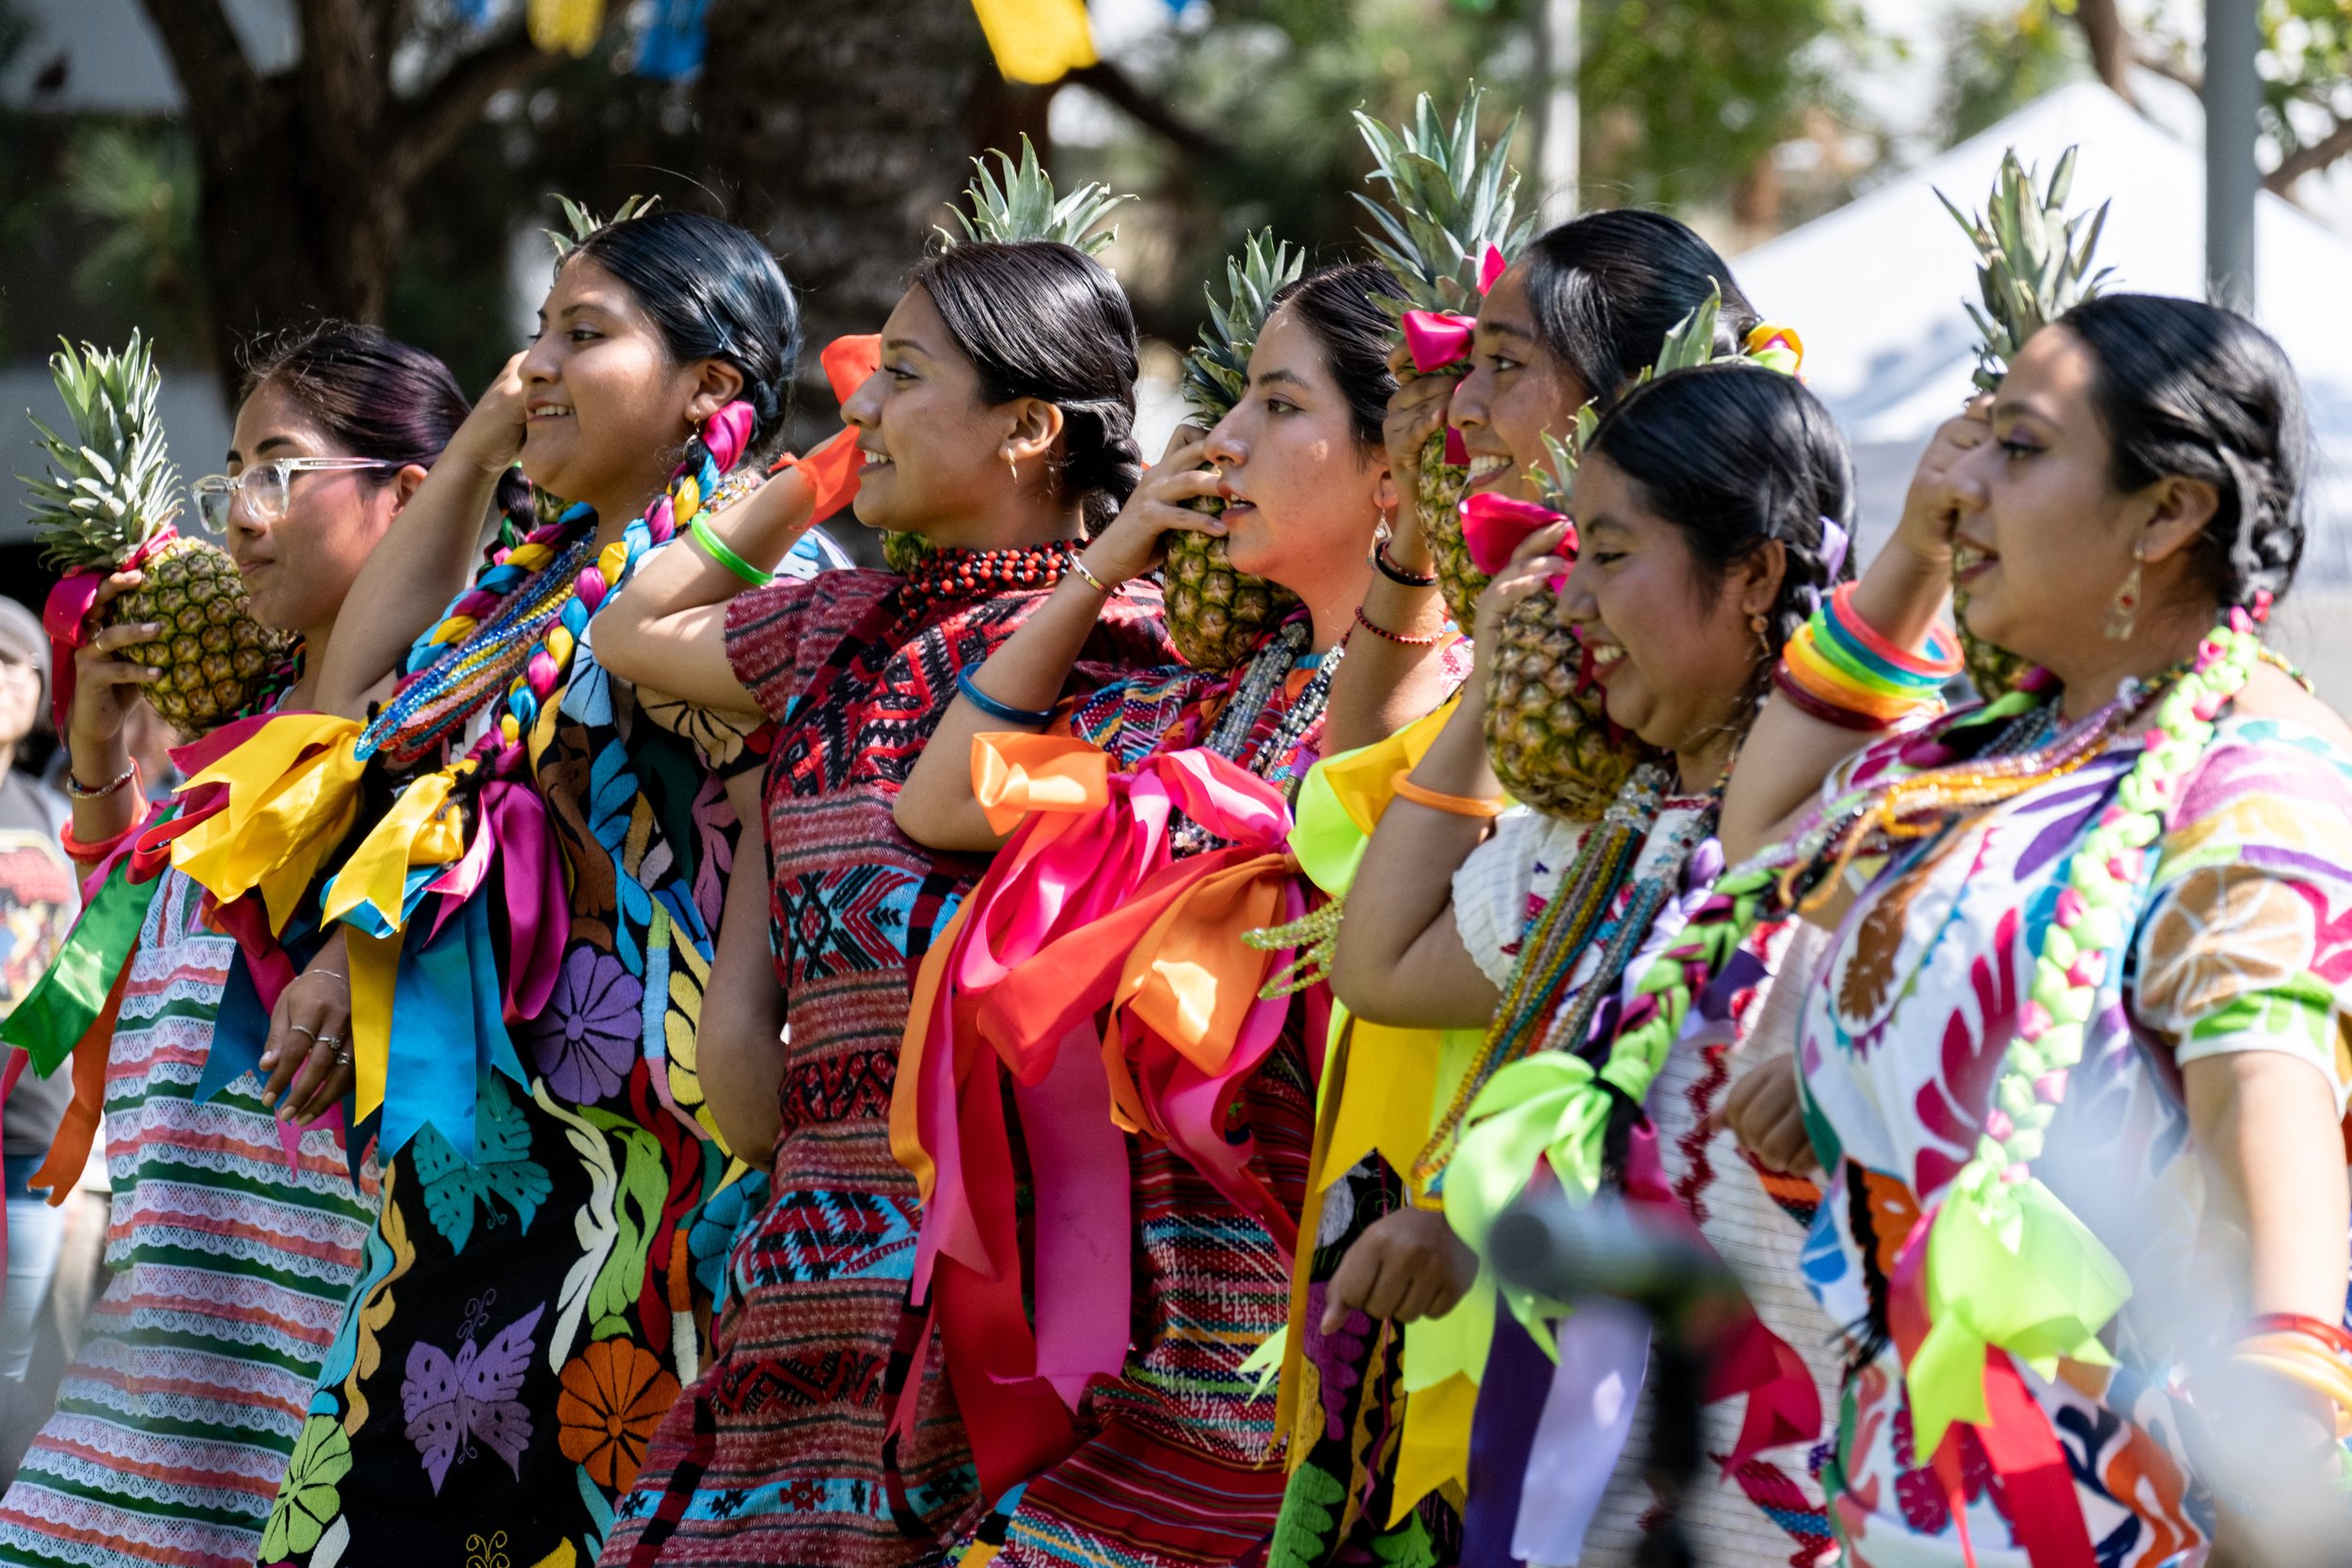  A group of seven women holding pineapples on their shoulder perform a Oaxacan dance during the Guelaguetza event at the Santa Monica College Main Campus on Thursday, Sept. 28th in Santa Monica, Calif. (Akemi Rico | The Corsair) 